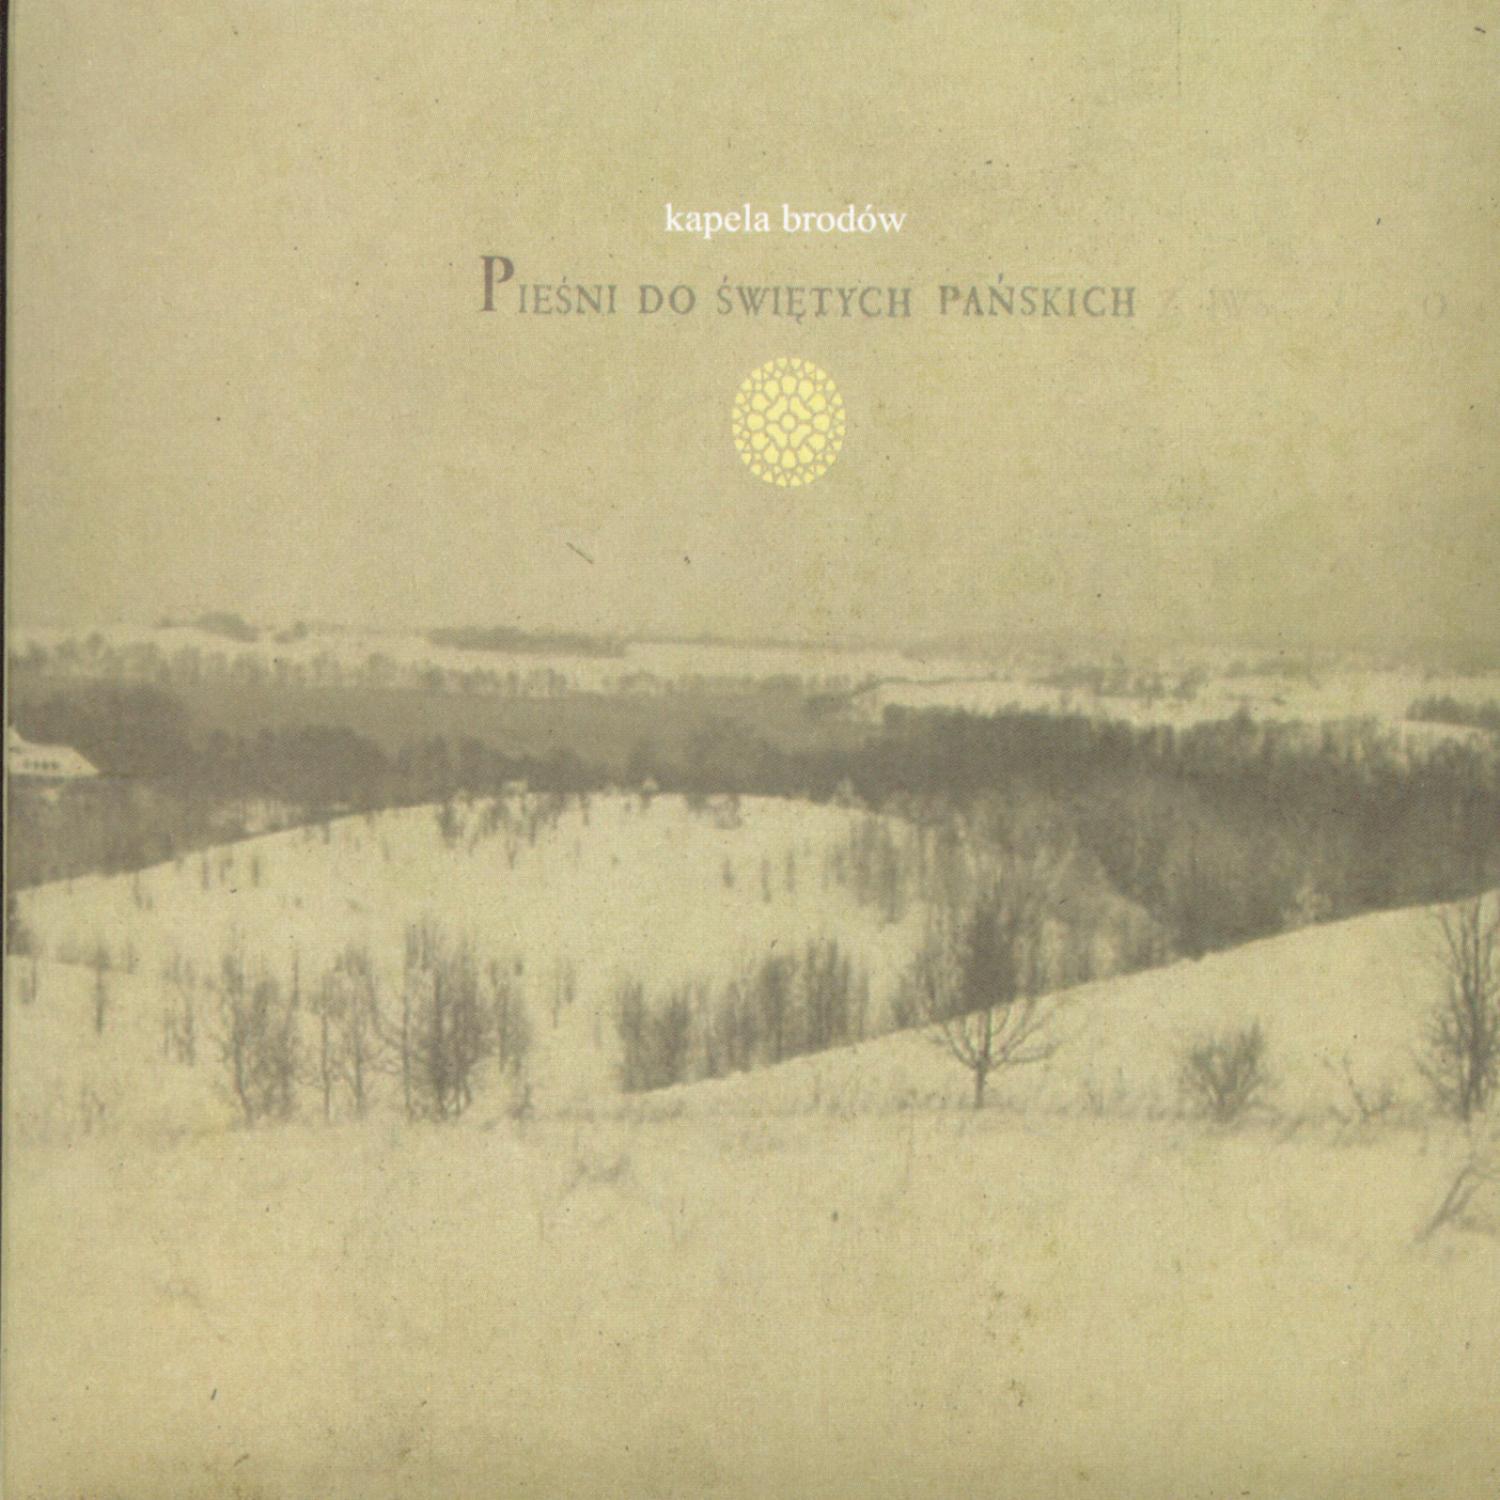 Piesni do Swietych Panskich / Songs to the Saints